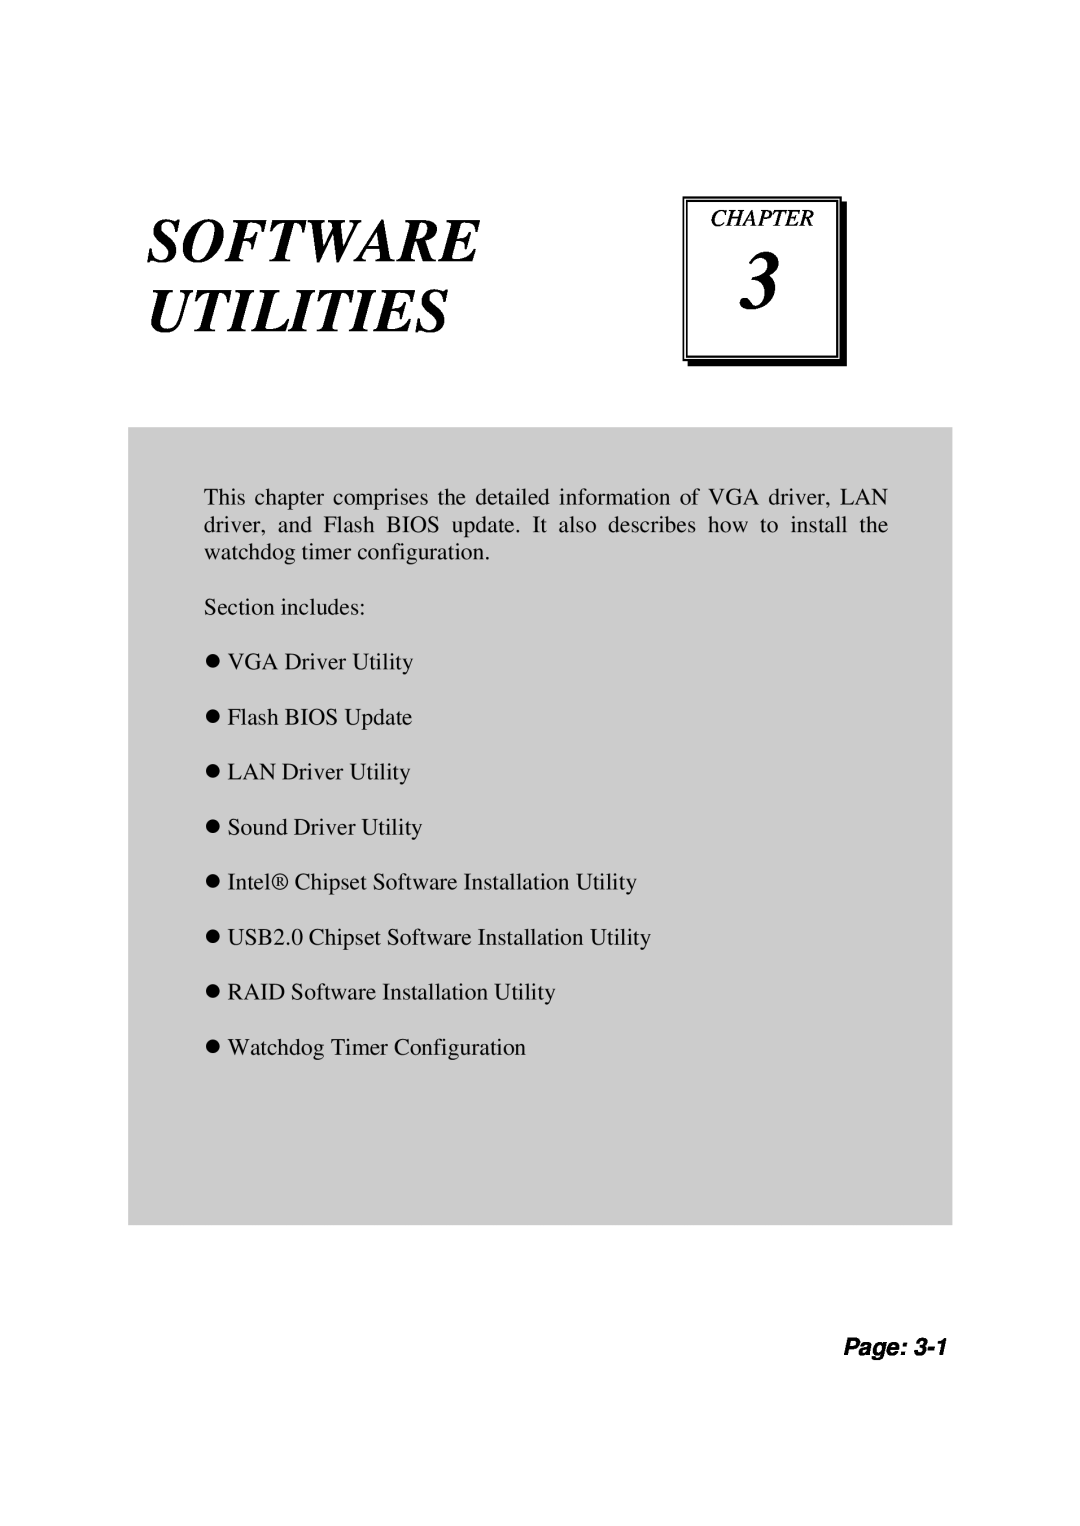 Intel PMB-531LF user manual Software Utilities, Chapter, Page 